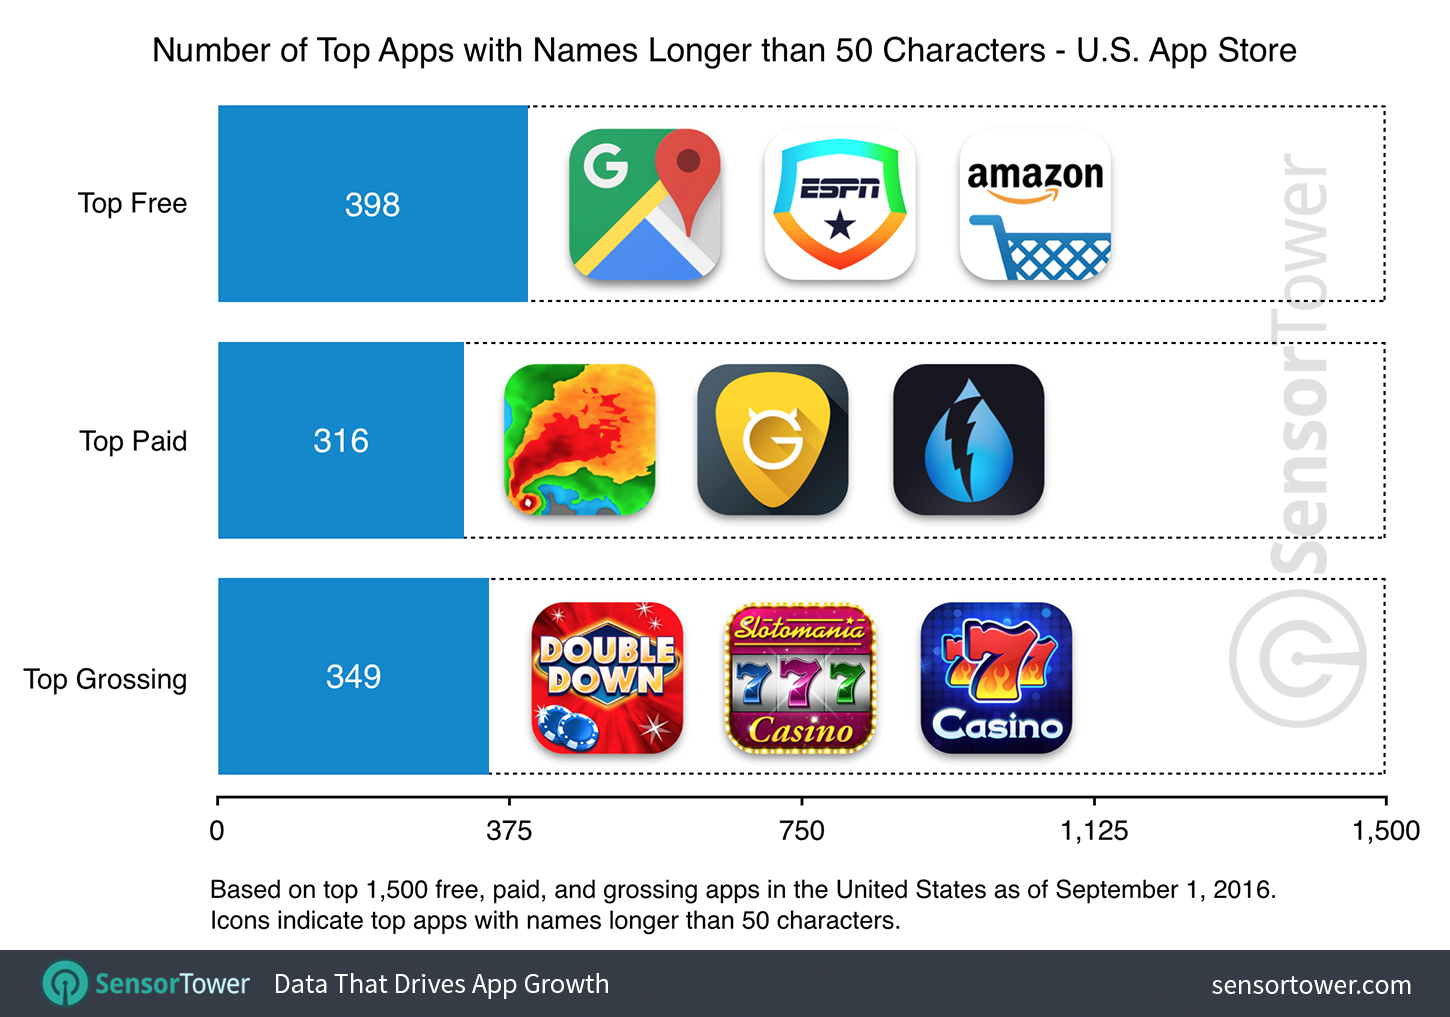 Chart Showing Number of Top Apps Needing App Name Shortening